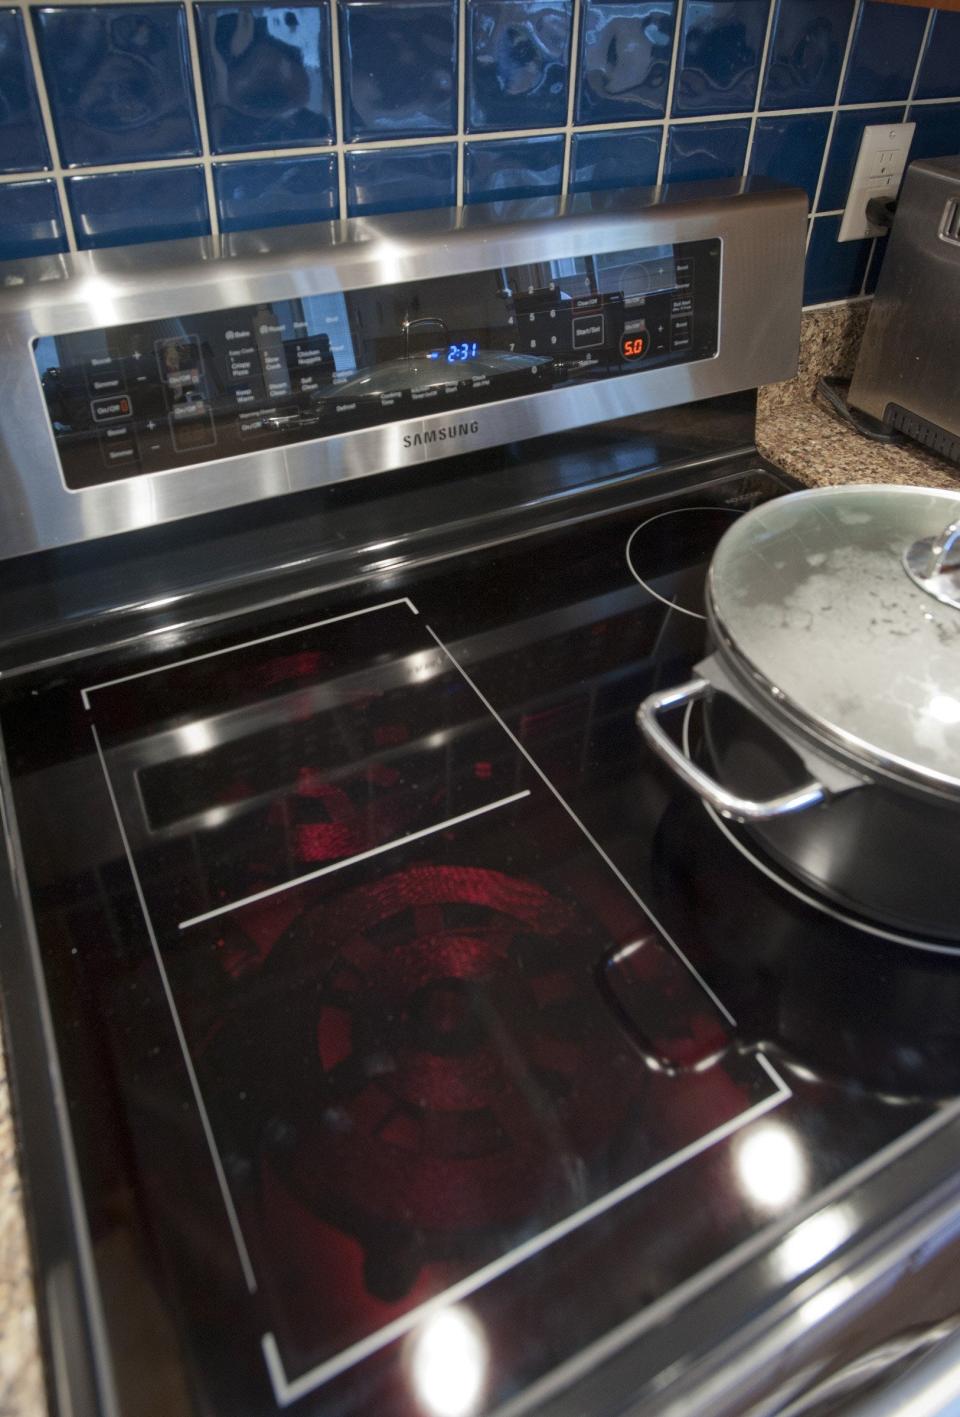 Induction stoves have safety advantages and the stove shuts off when you remove the pot.